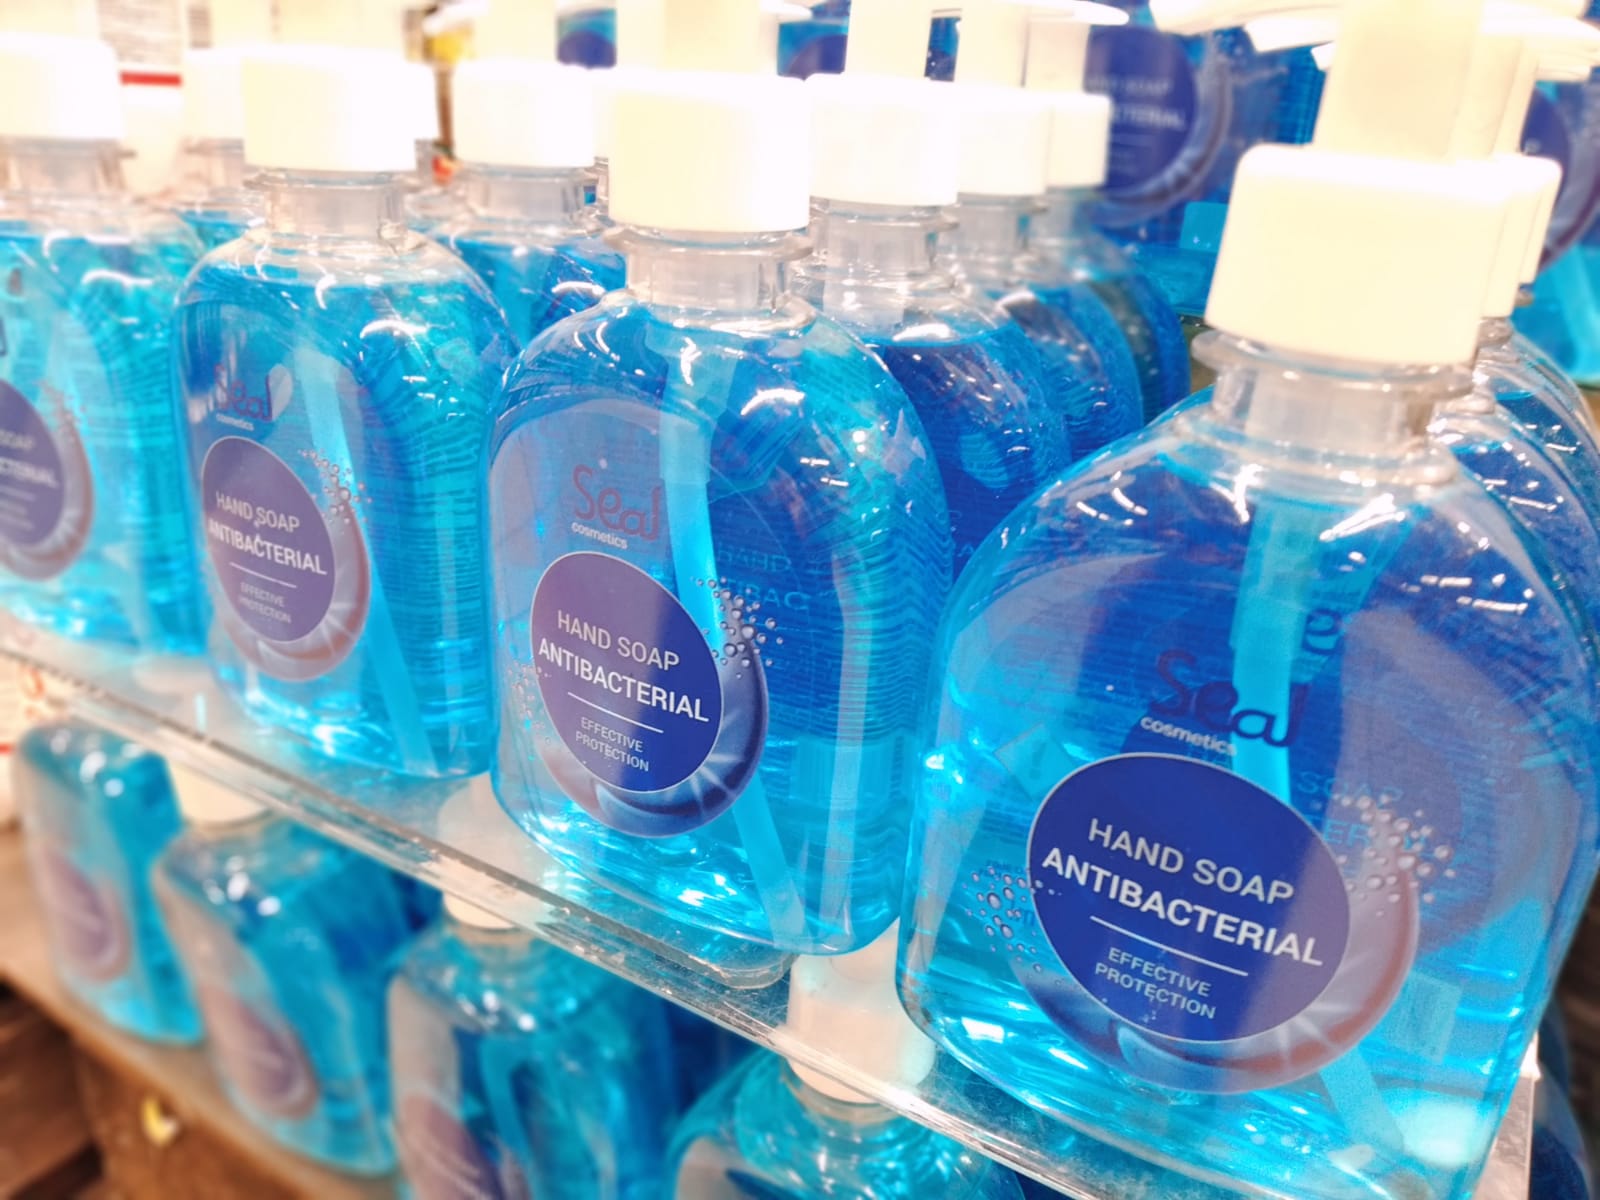 antibacterial hand soap from brand seal of Spodrība put on a shelf as a result of successful merchandising work